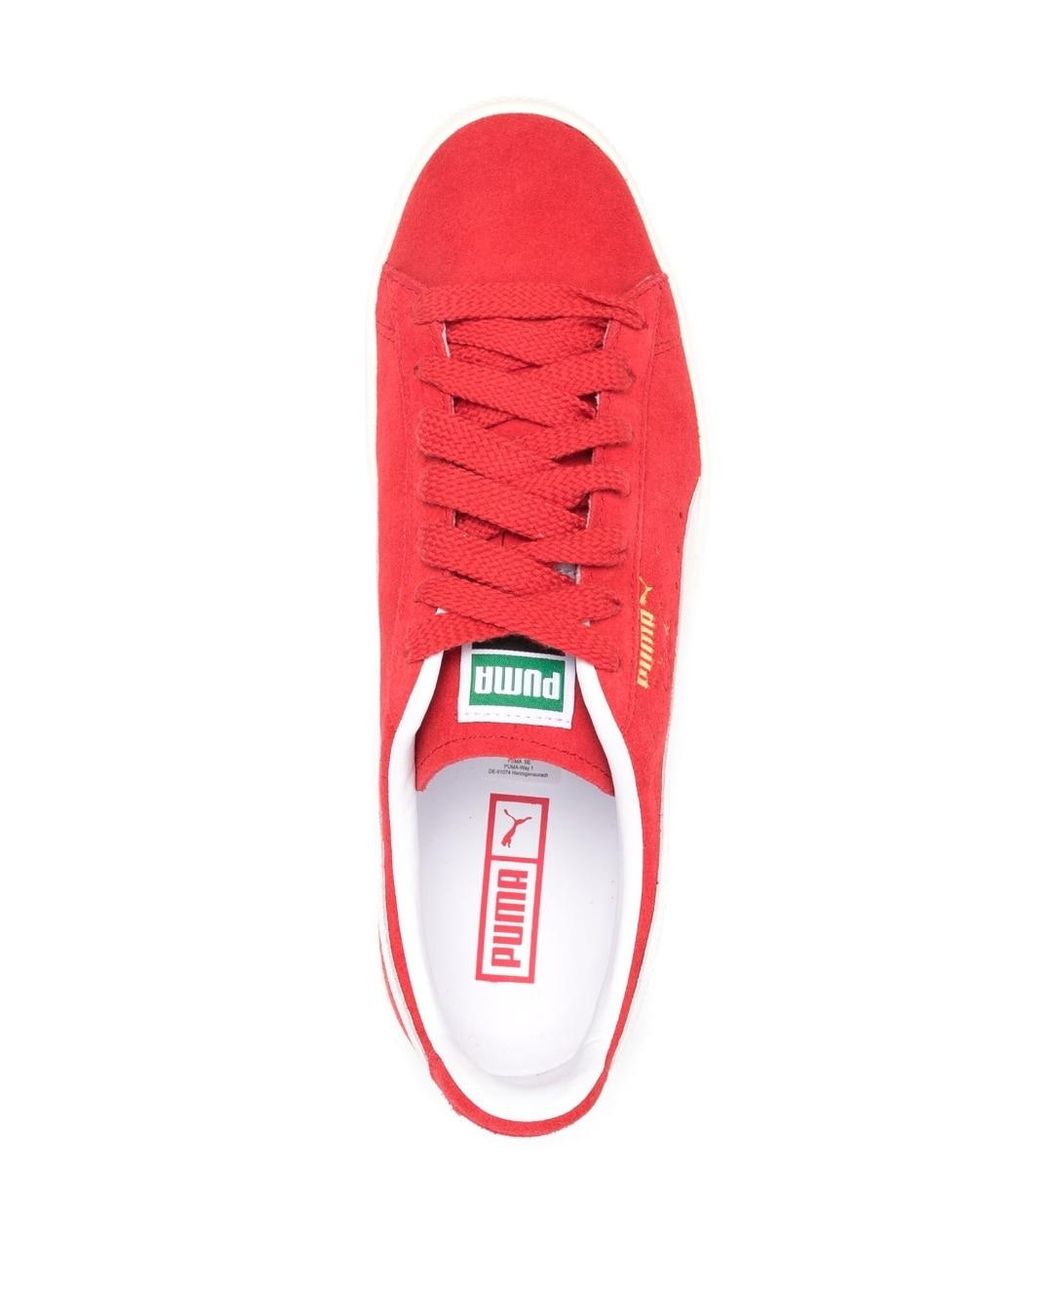 PUMA Clyde Leather Sneakers in Red | Lyst